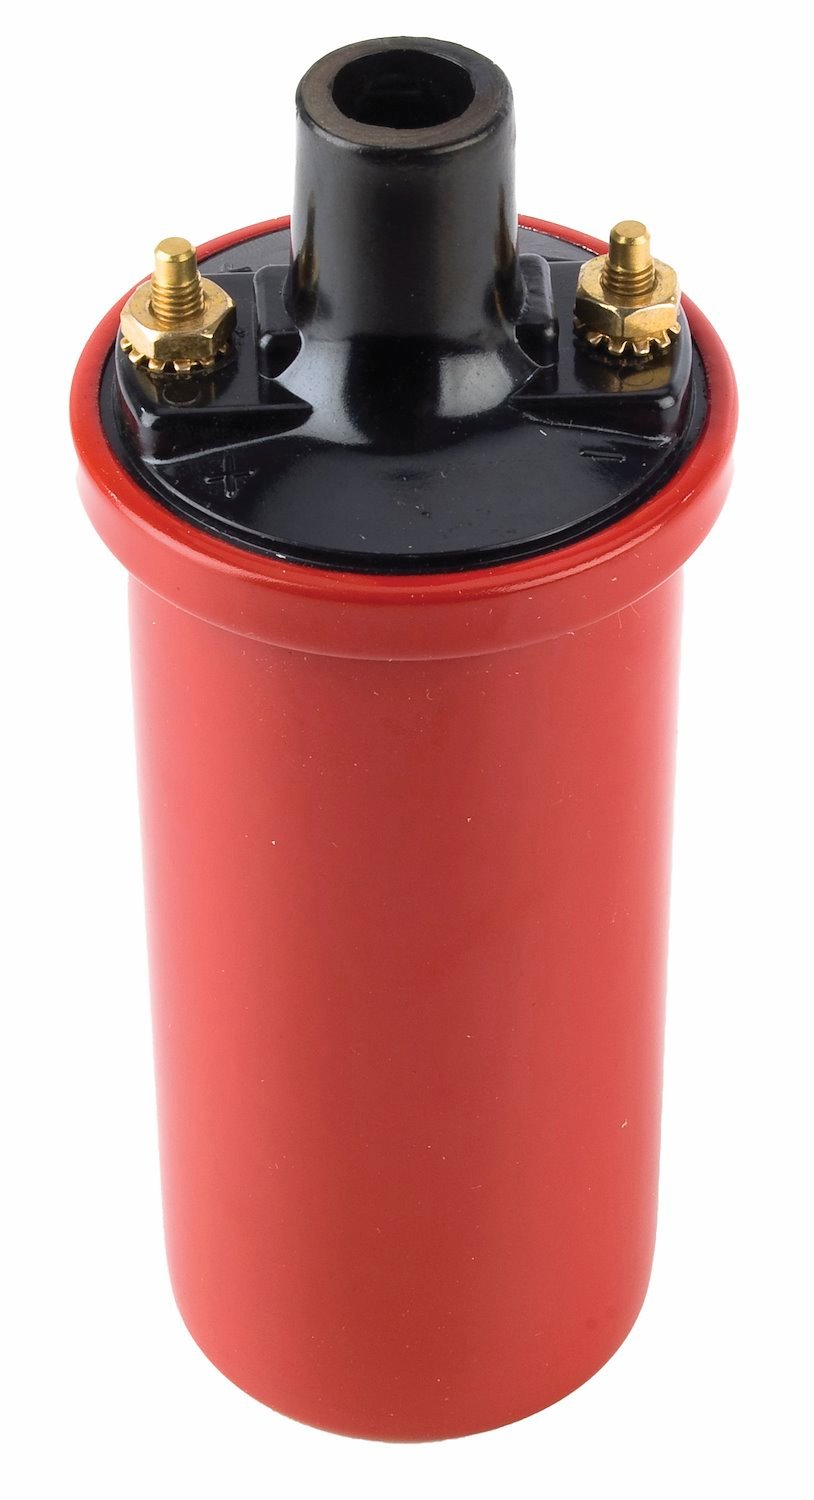 High-Energy Ignition Coil for Breaker Points/Non-CD Electronic Ignition Systems [Red]